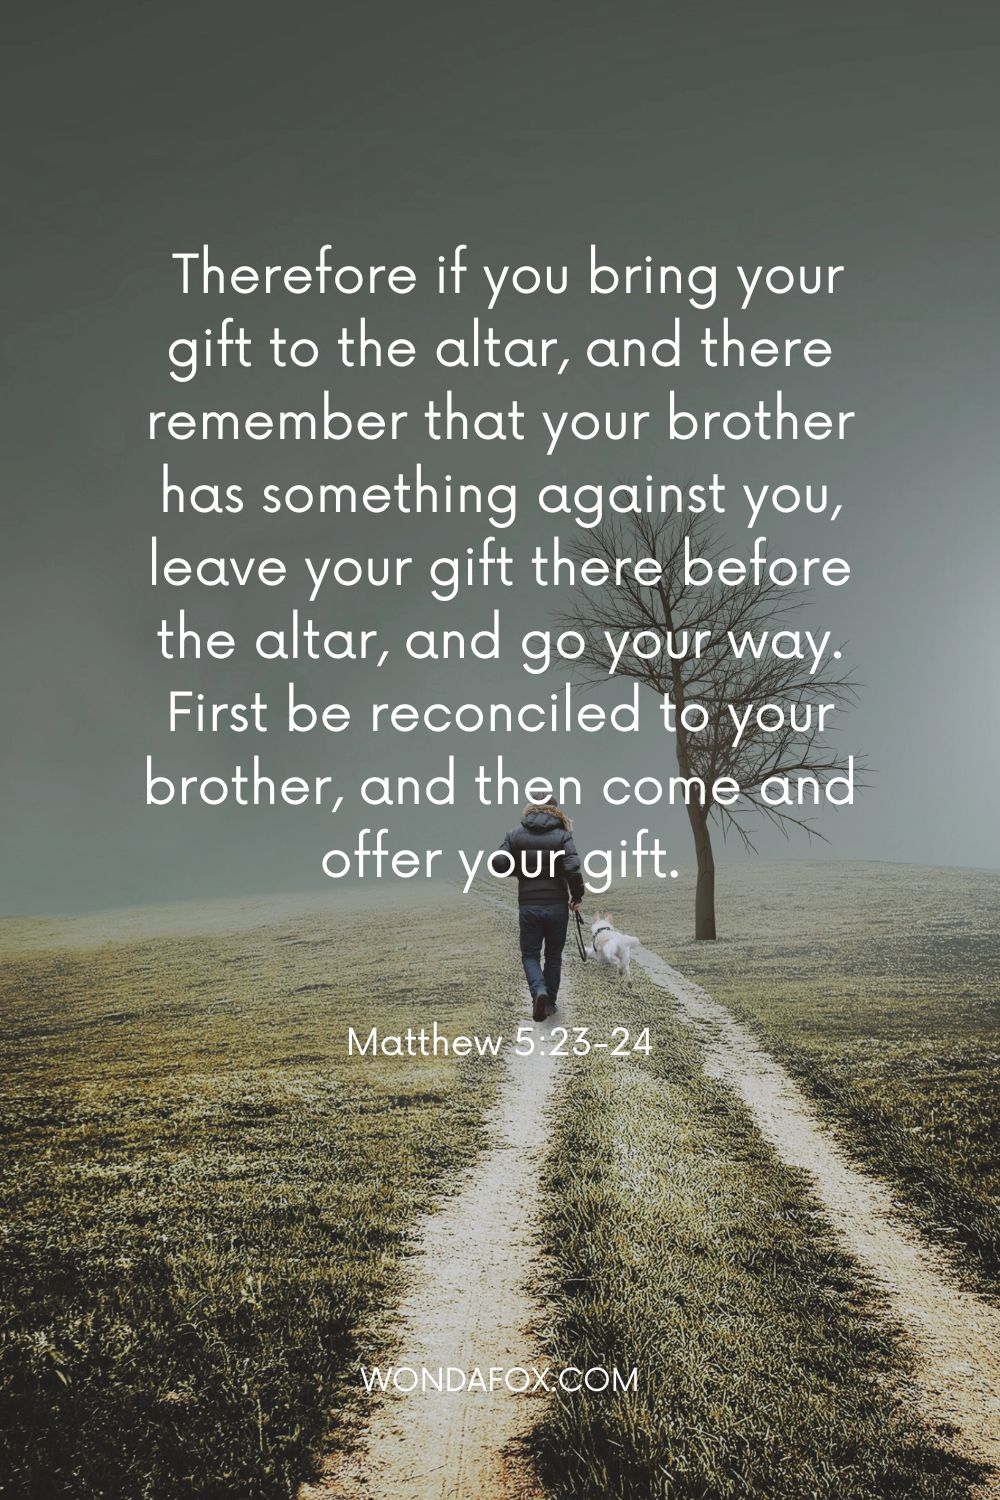  Therefore if you bring your gift to the altar, and there remember that your brother has something against you, leave your gift there before the altar, and go your way. First be reconciled to your brother, and then come and offer your gift.